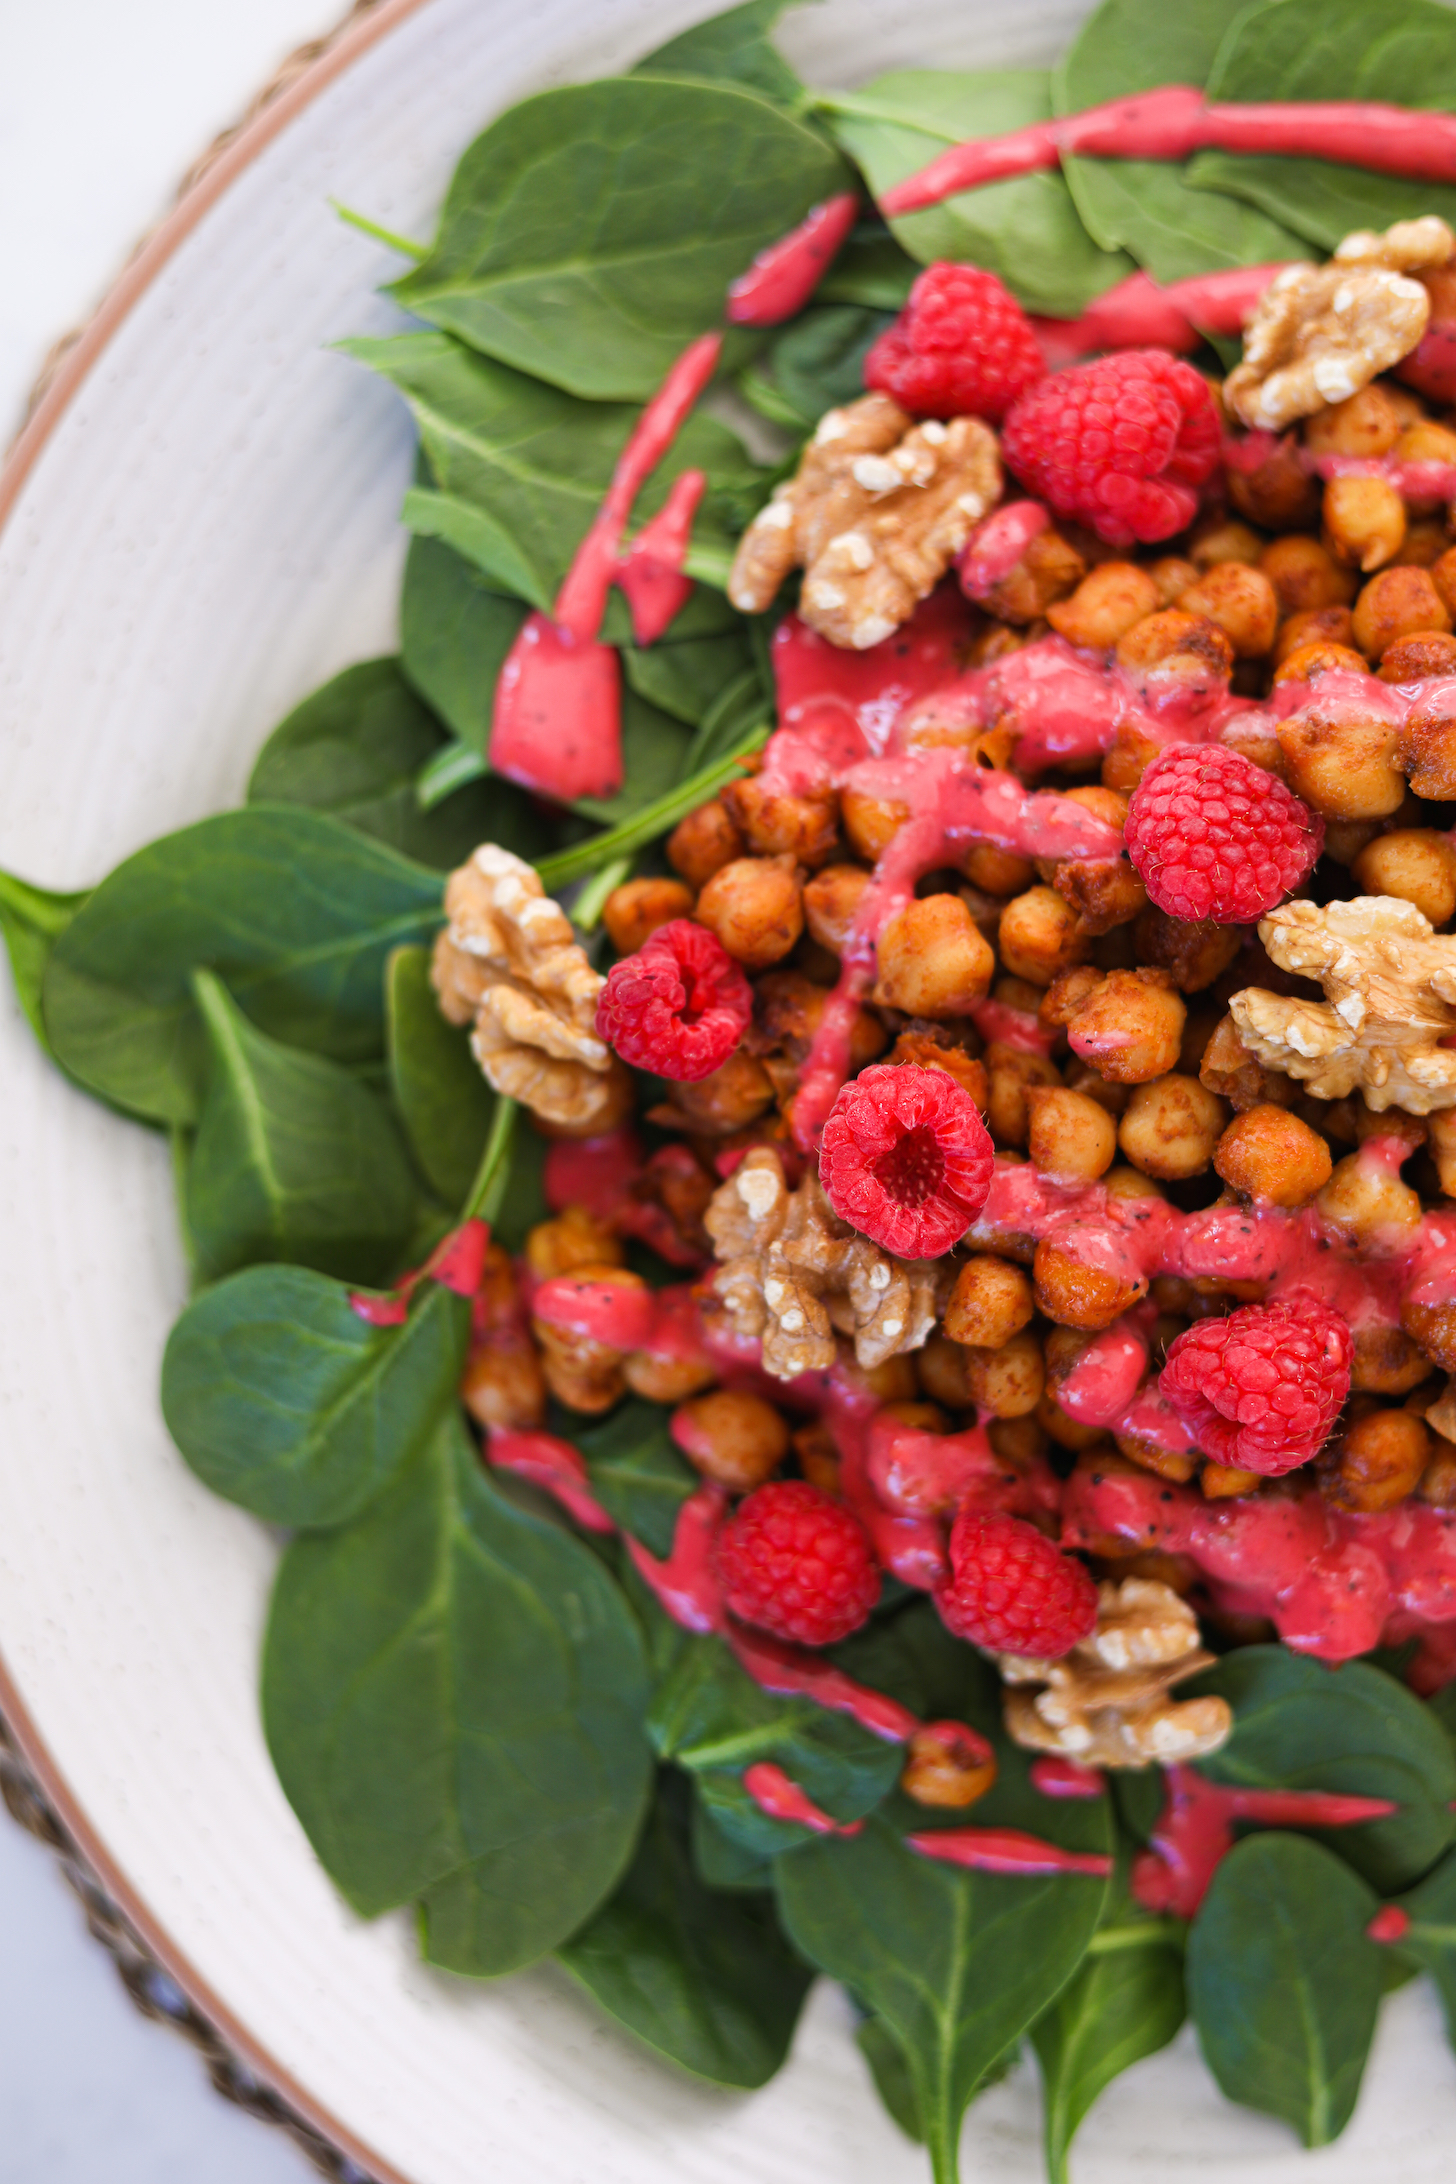 View of half a plate of chickpeas on a bed of spinach topped with raspberries, walnuts and a red dressing.